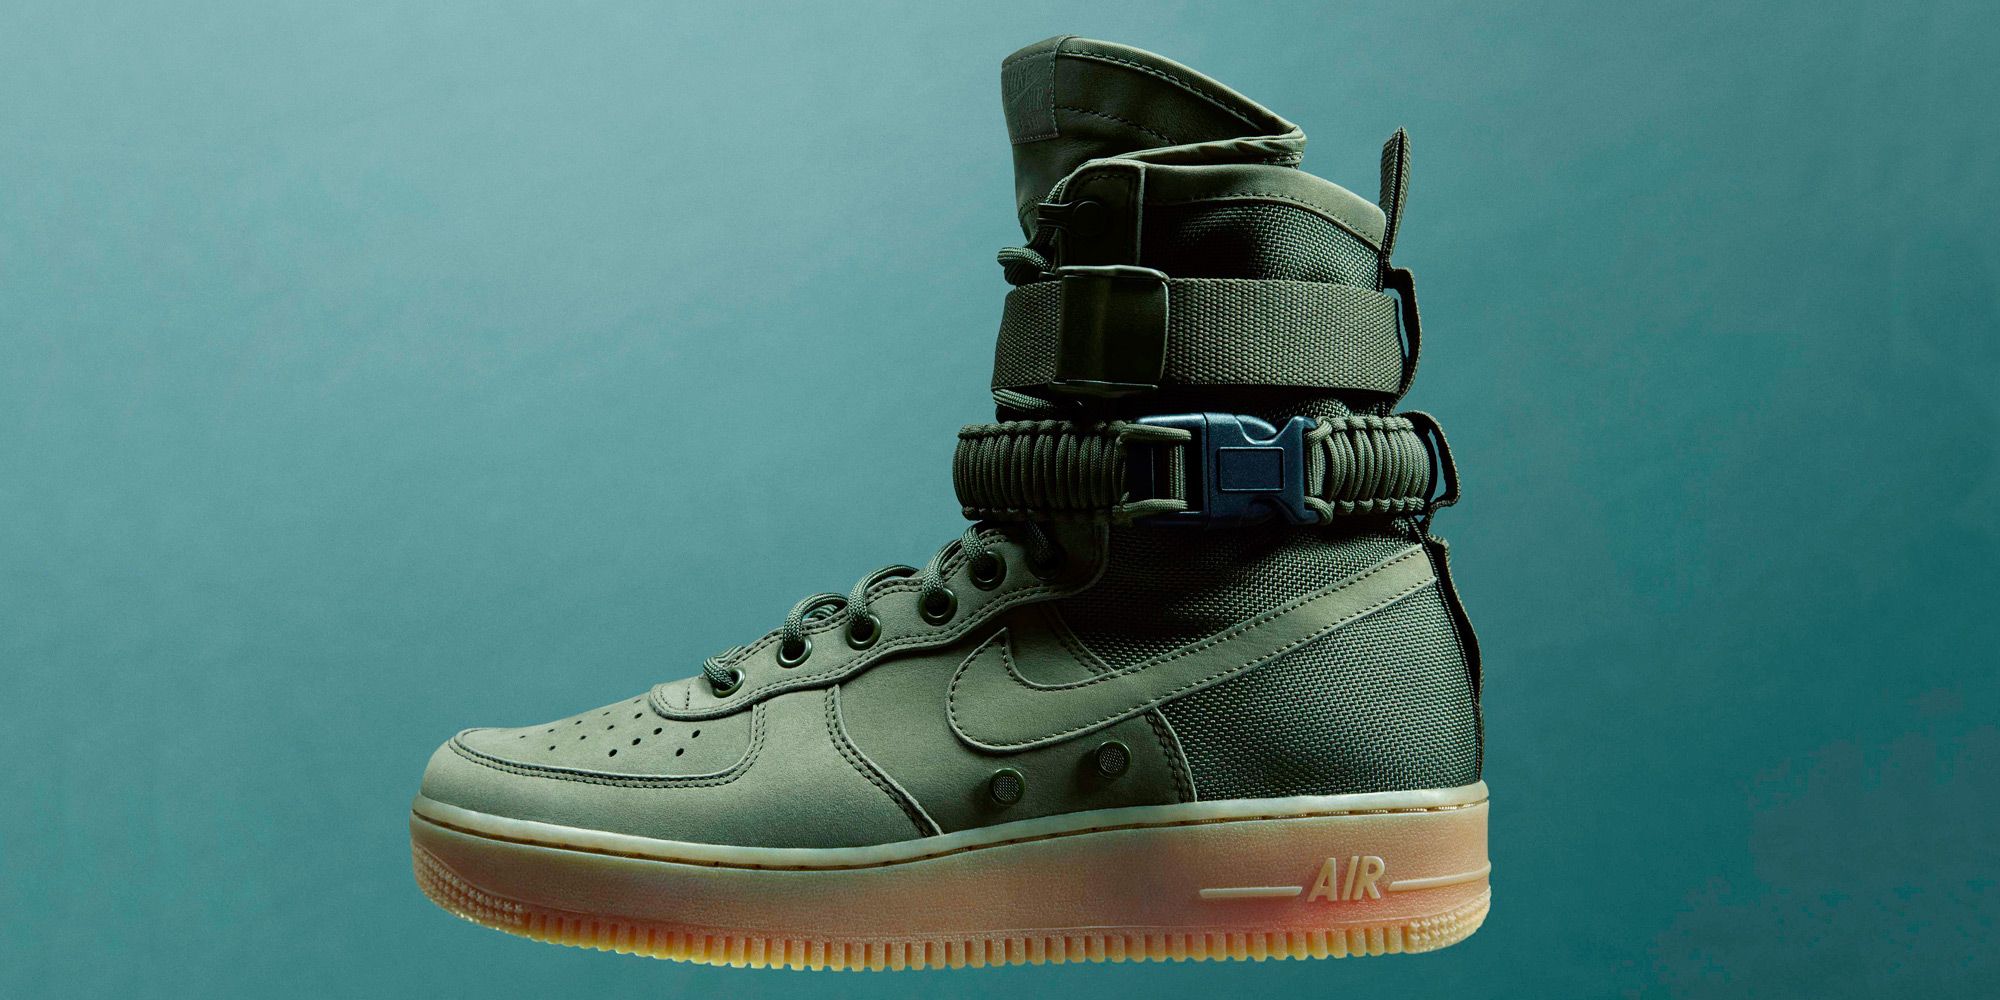 Nike Just Dropped a Military-Inspired Air Force 1